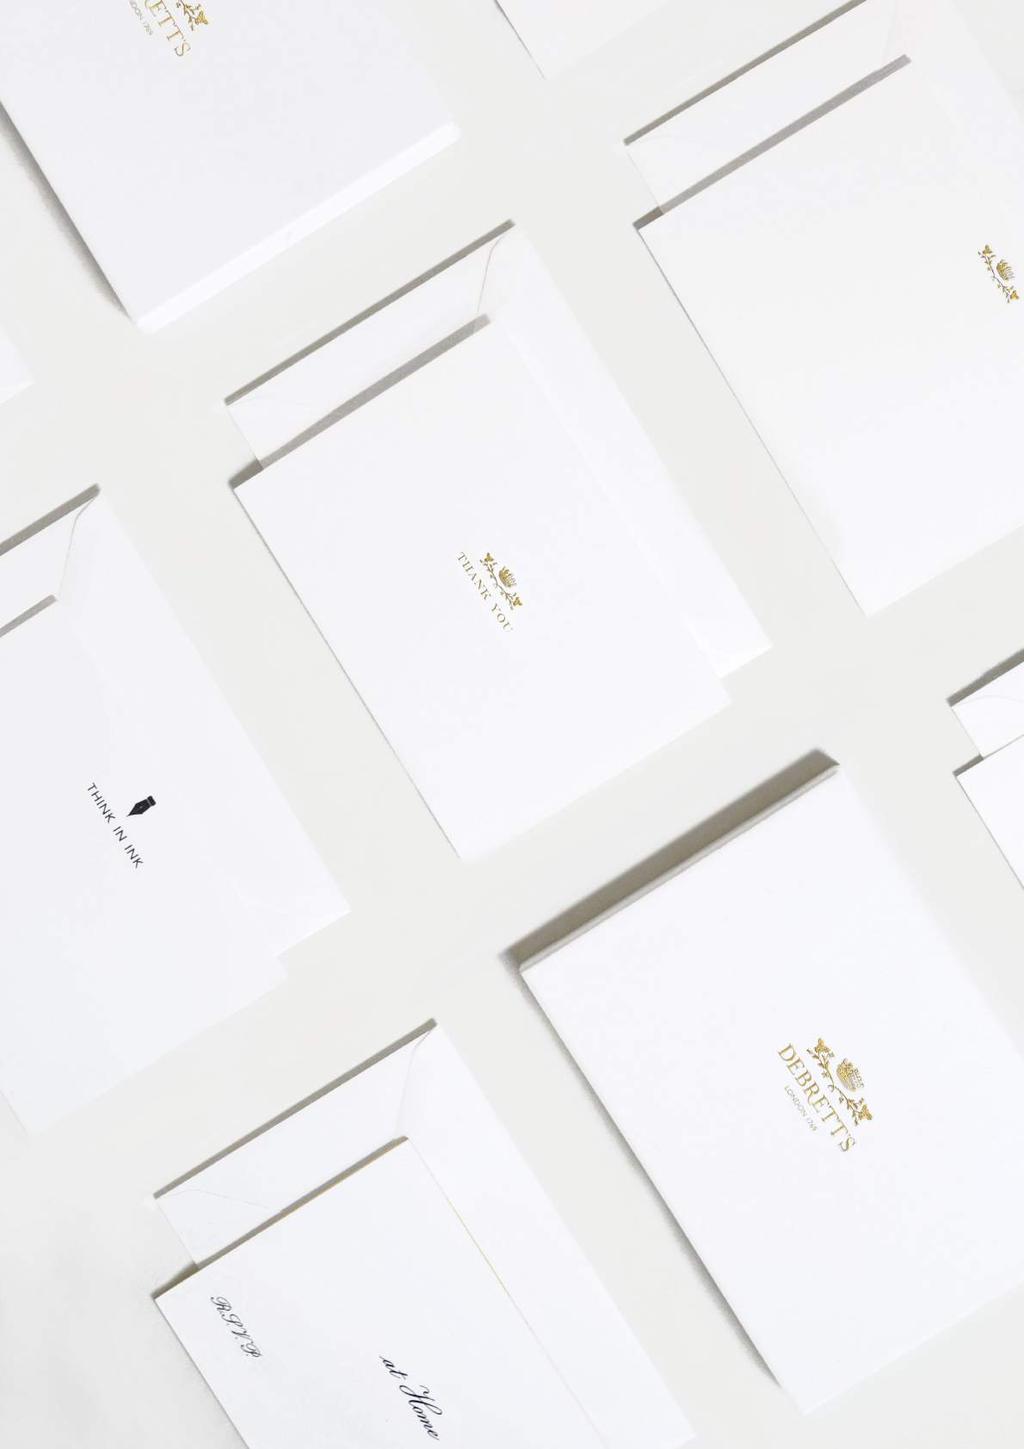 DEBRETT S STATIONERY DEBRETT S PRODUCTS DEBRETT S STATIONERY This collection of stylish correspondence cards brings the pleasure of the handwritten note to invitations, thank you letters and personal